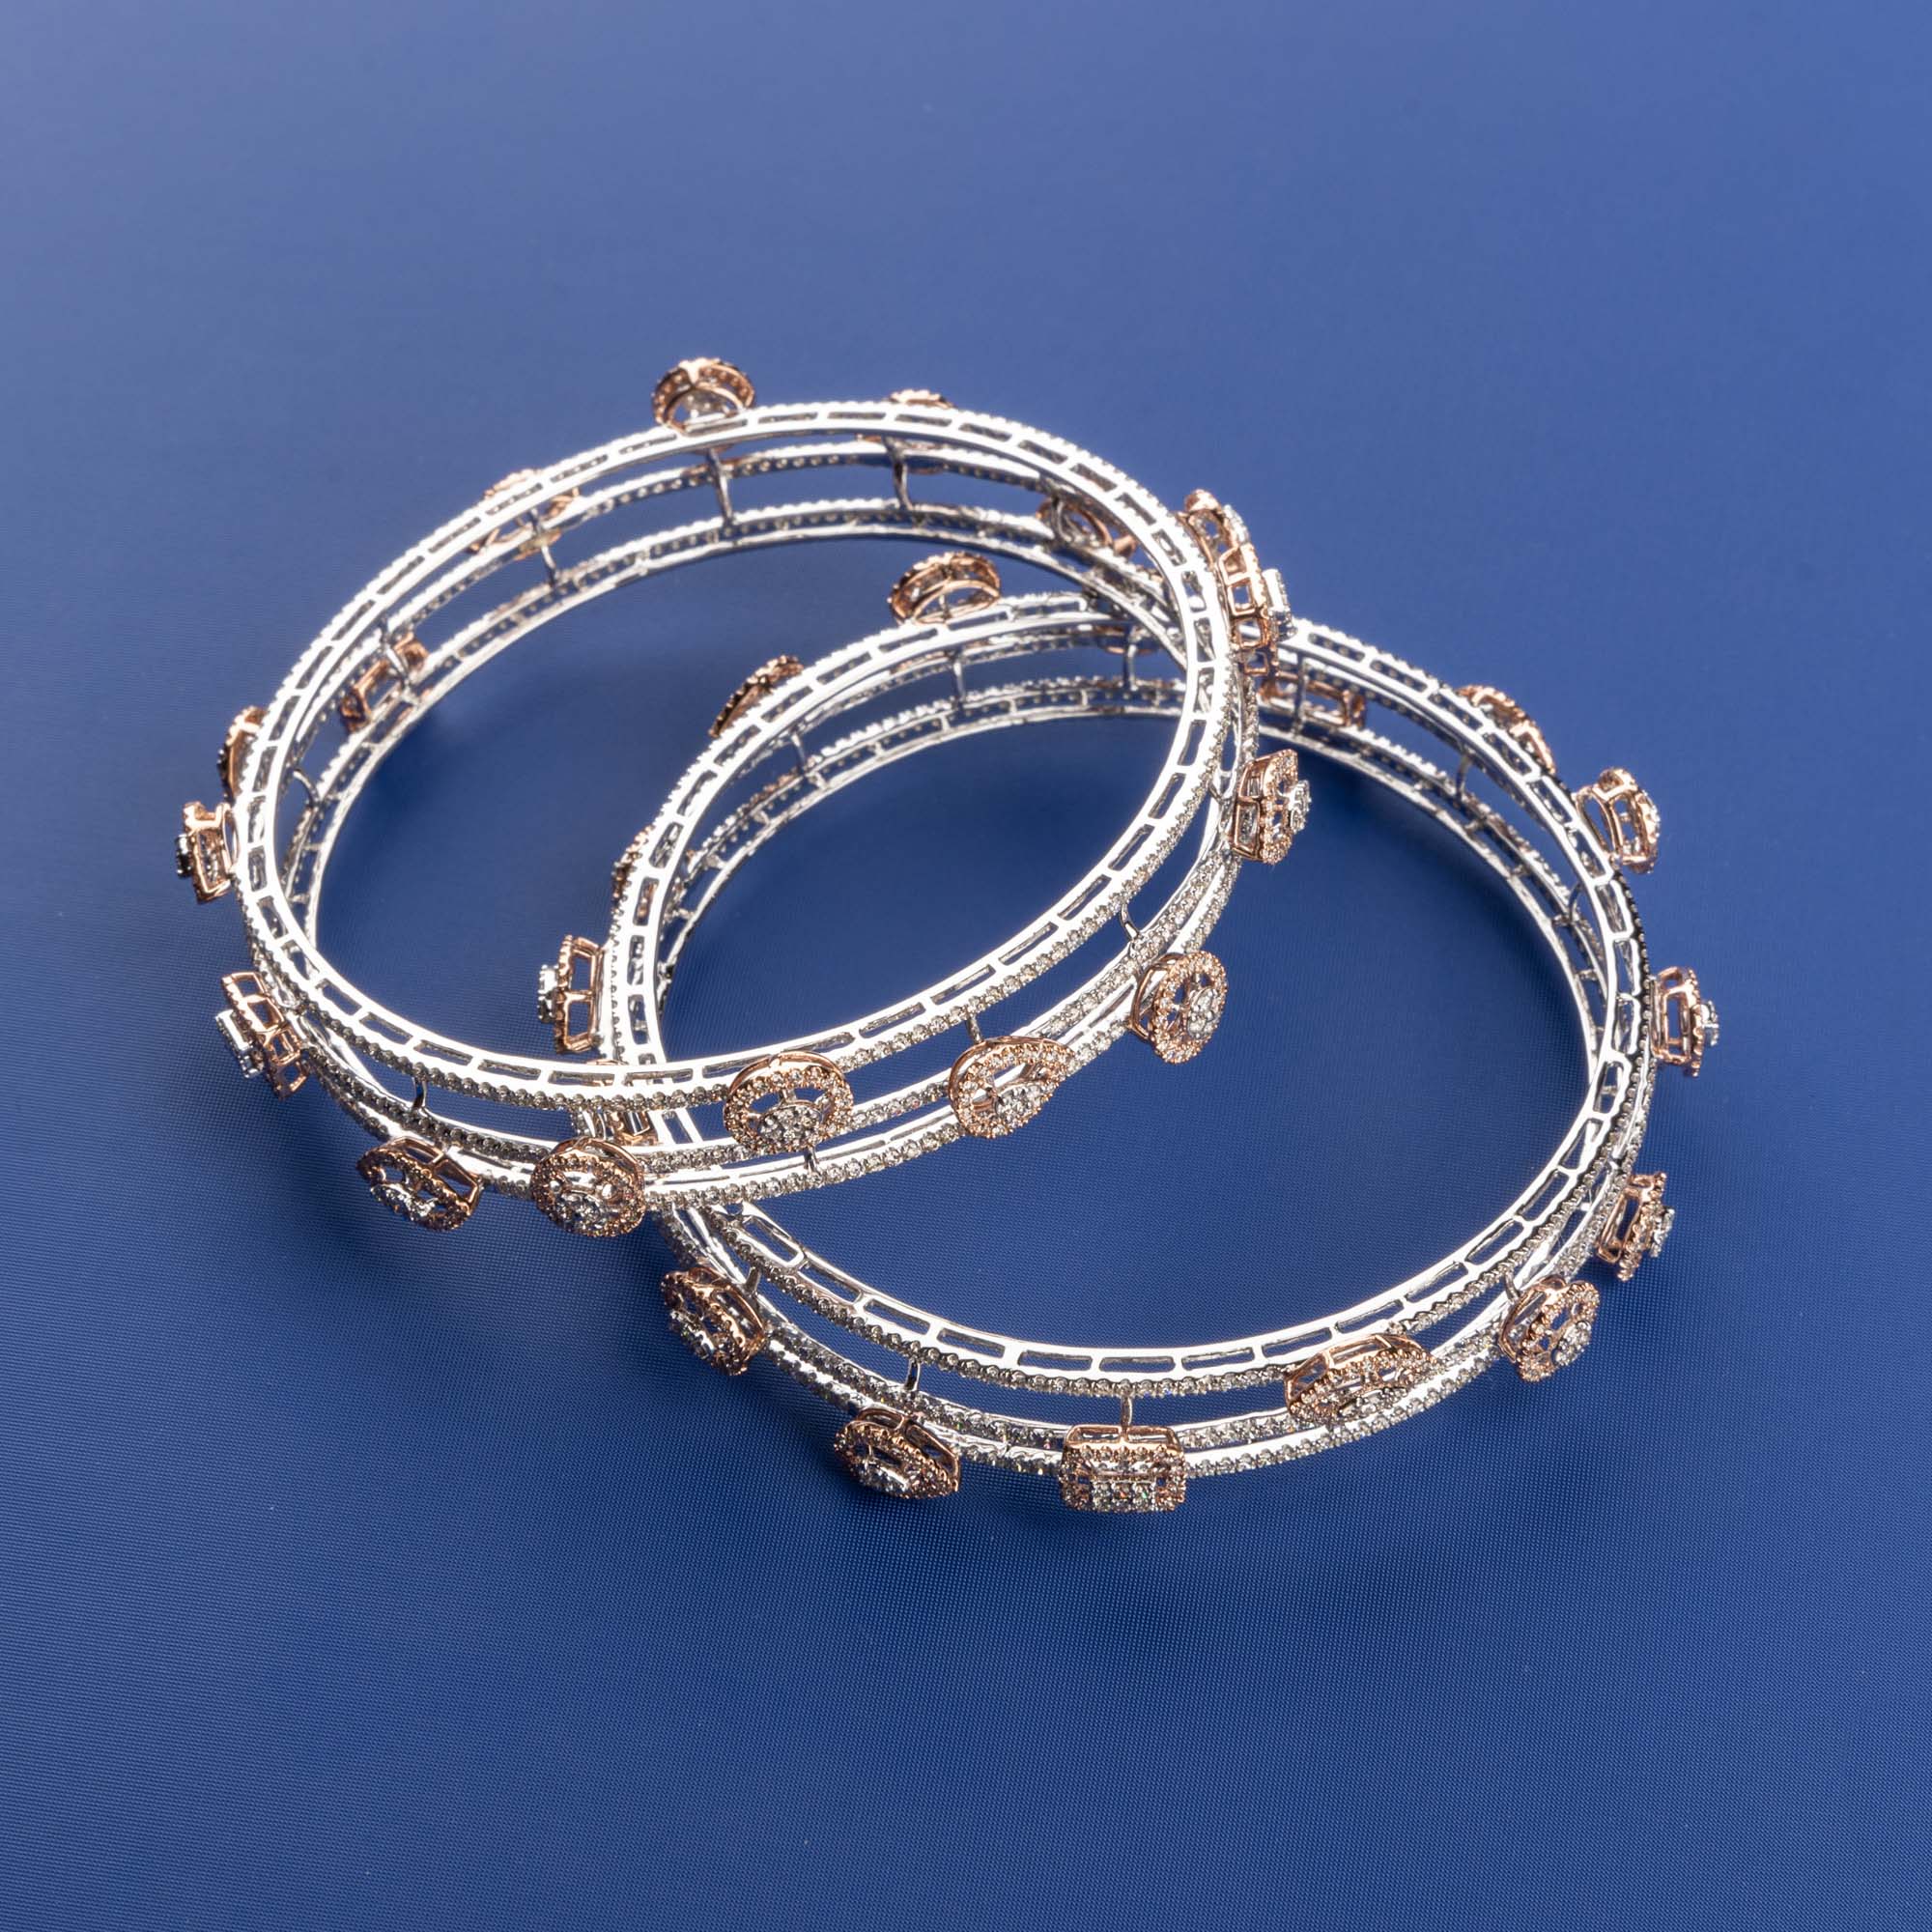 Pink Gold Delight: Handmade 18K White and Pink Gold Diamond Bangles